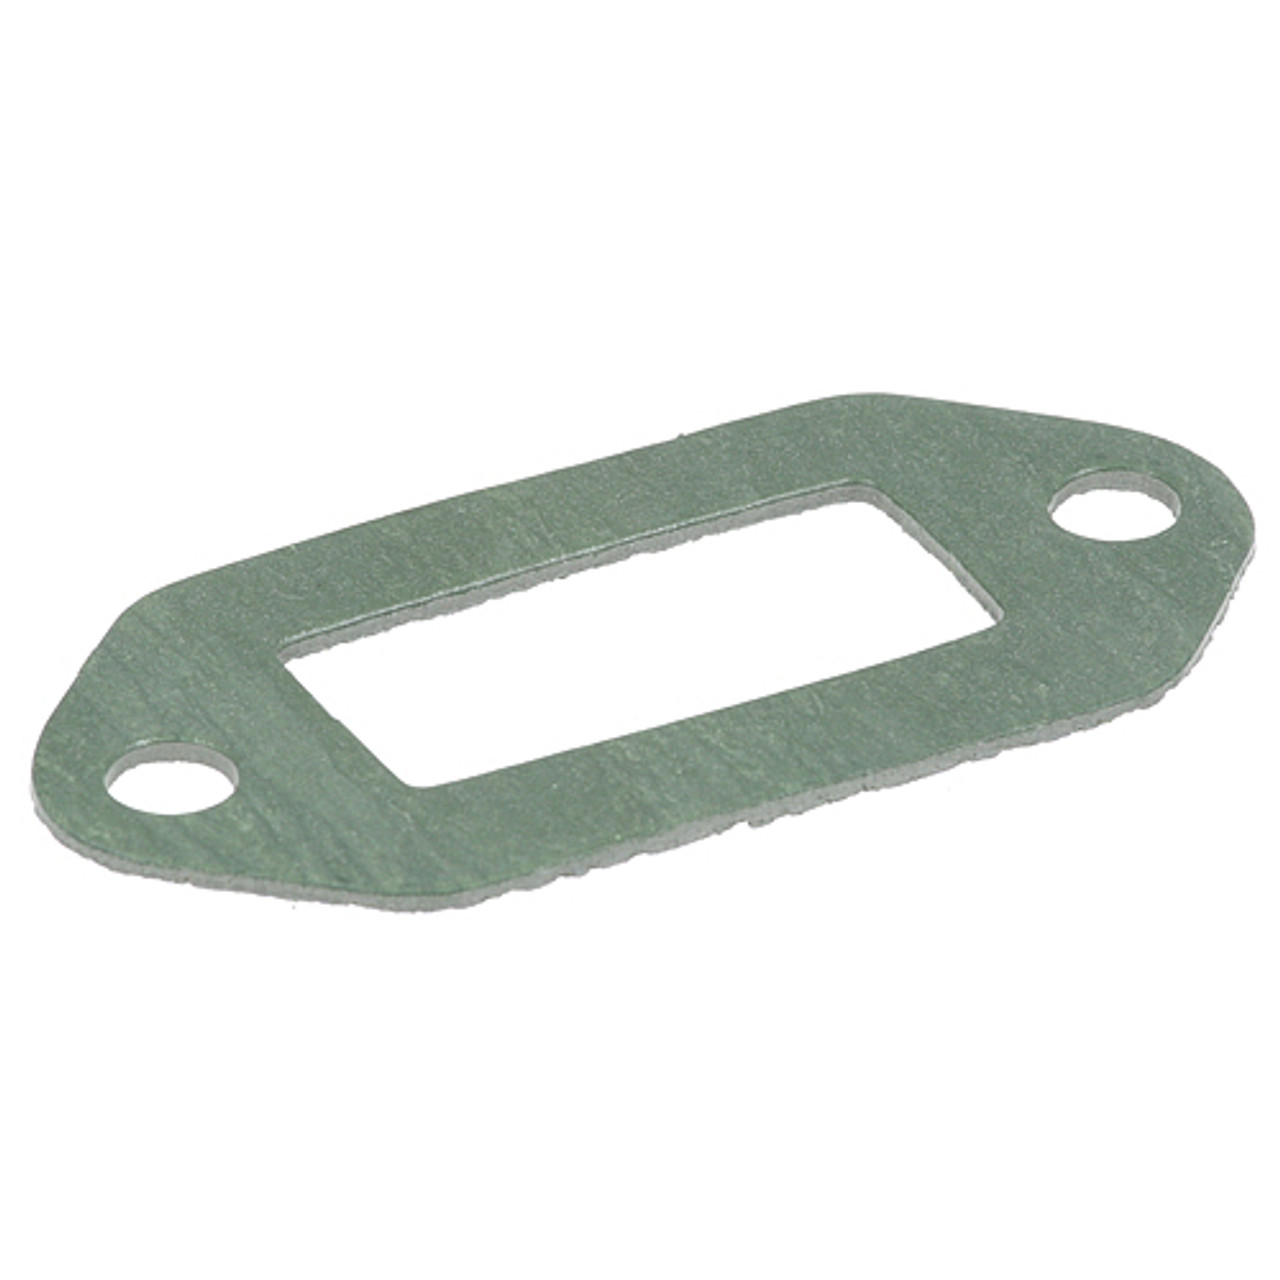 Gasket 3-3/4" X 1-13/16" - Replacement Part For Montague 30924-9